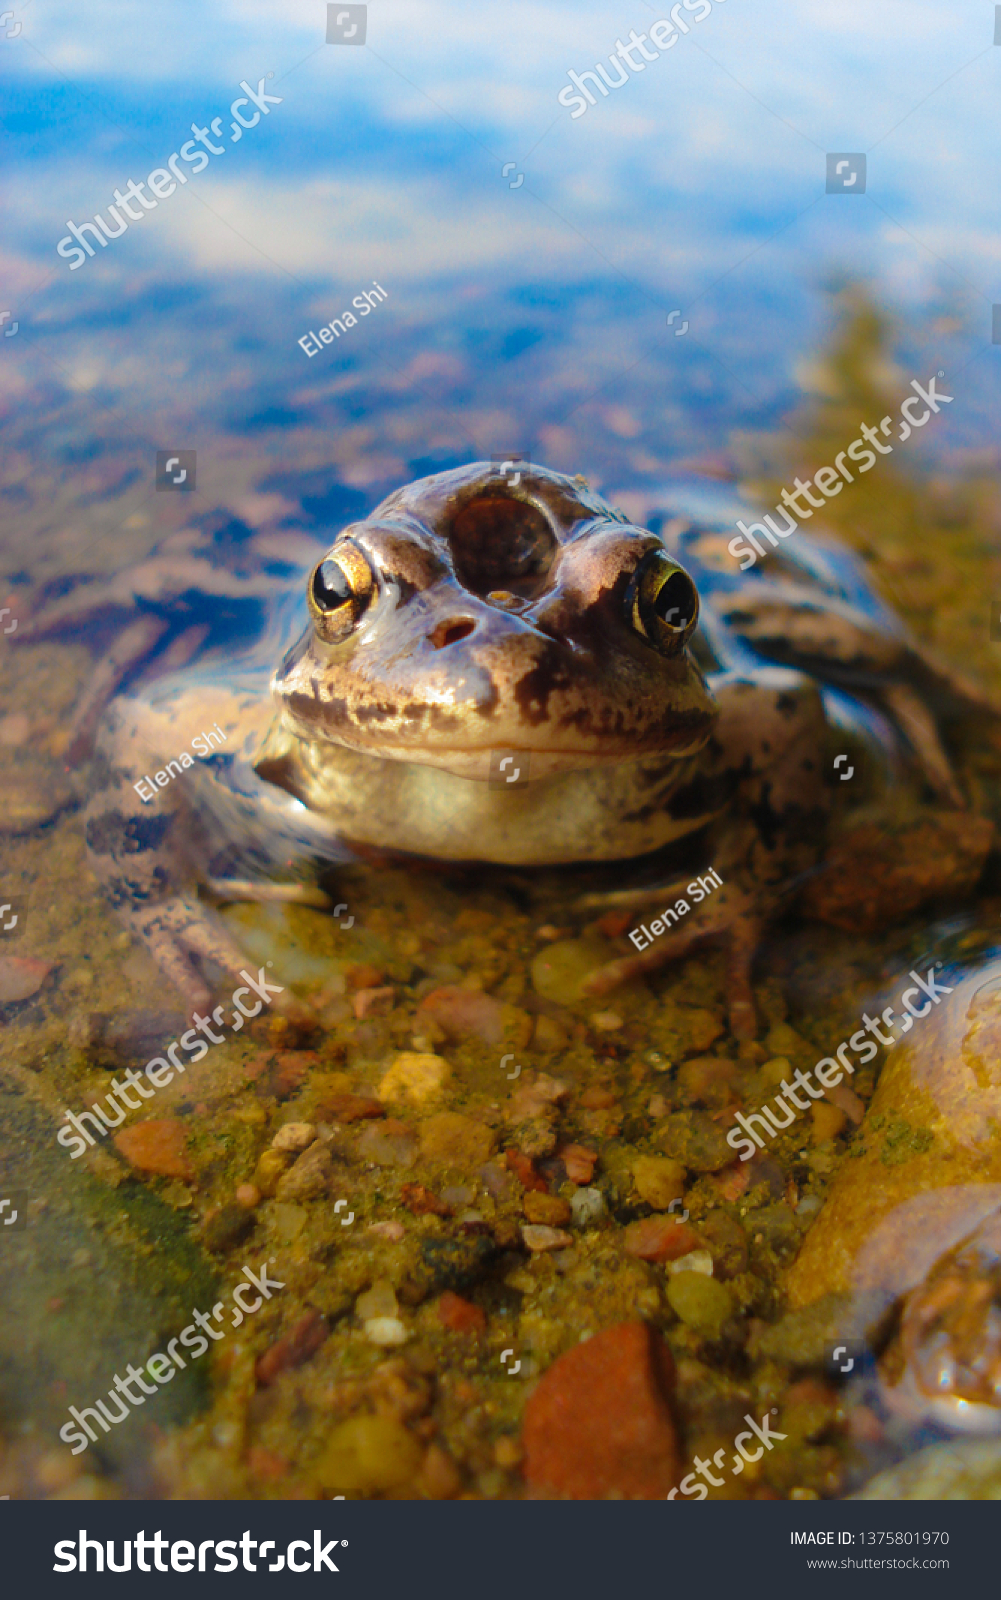 A frog with a hole in his head sits in clear water. Reptile in the natural environment, exclusive view, close-up.

 #1375801970